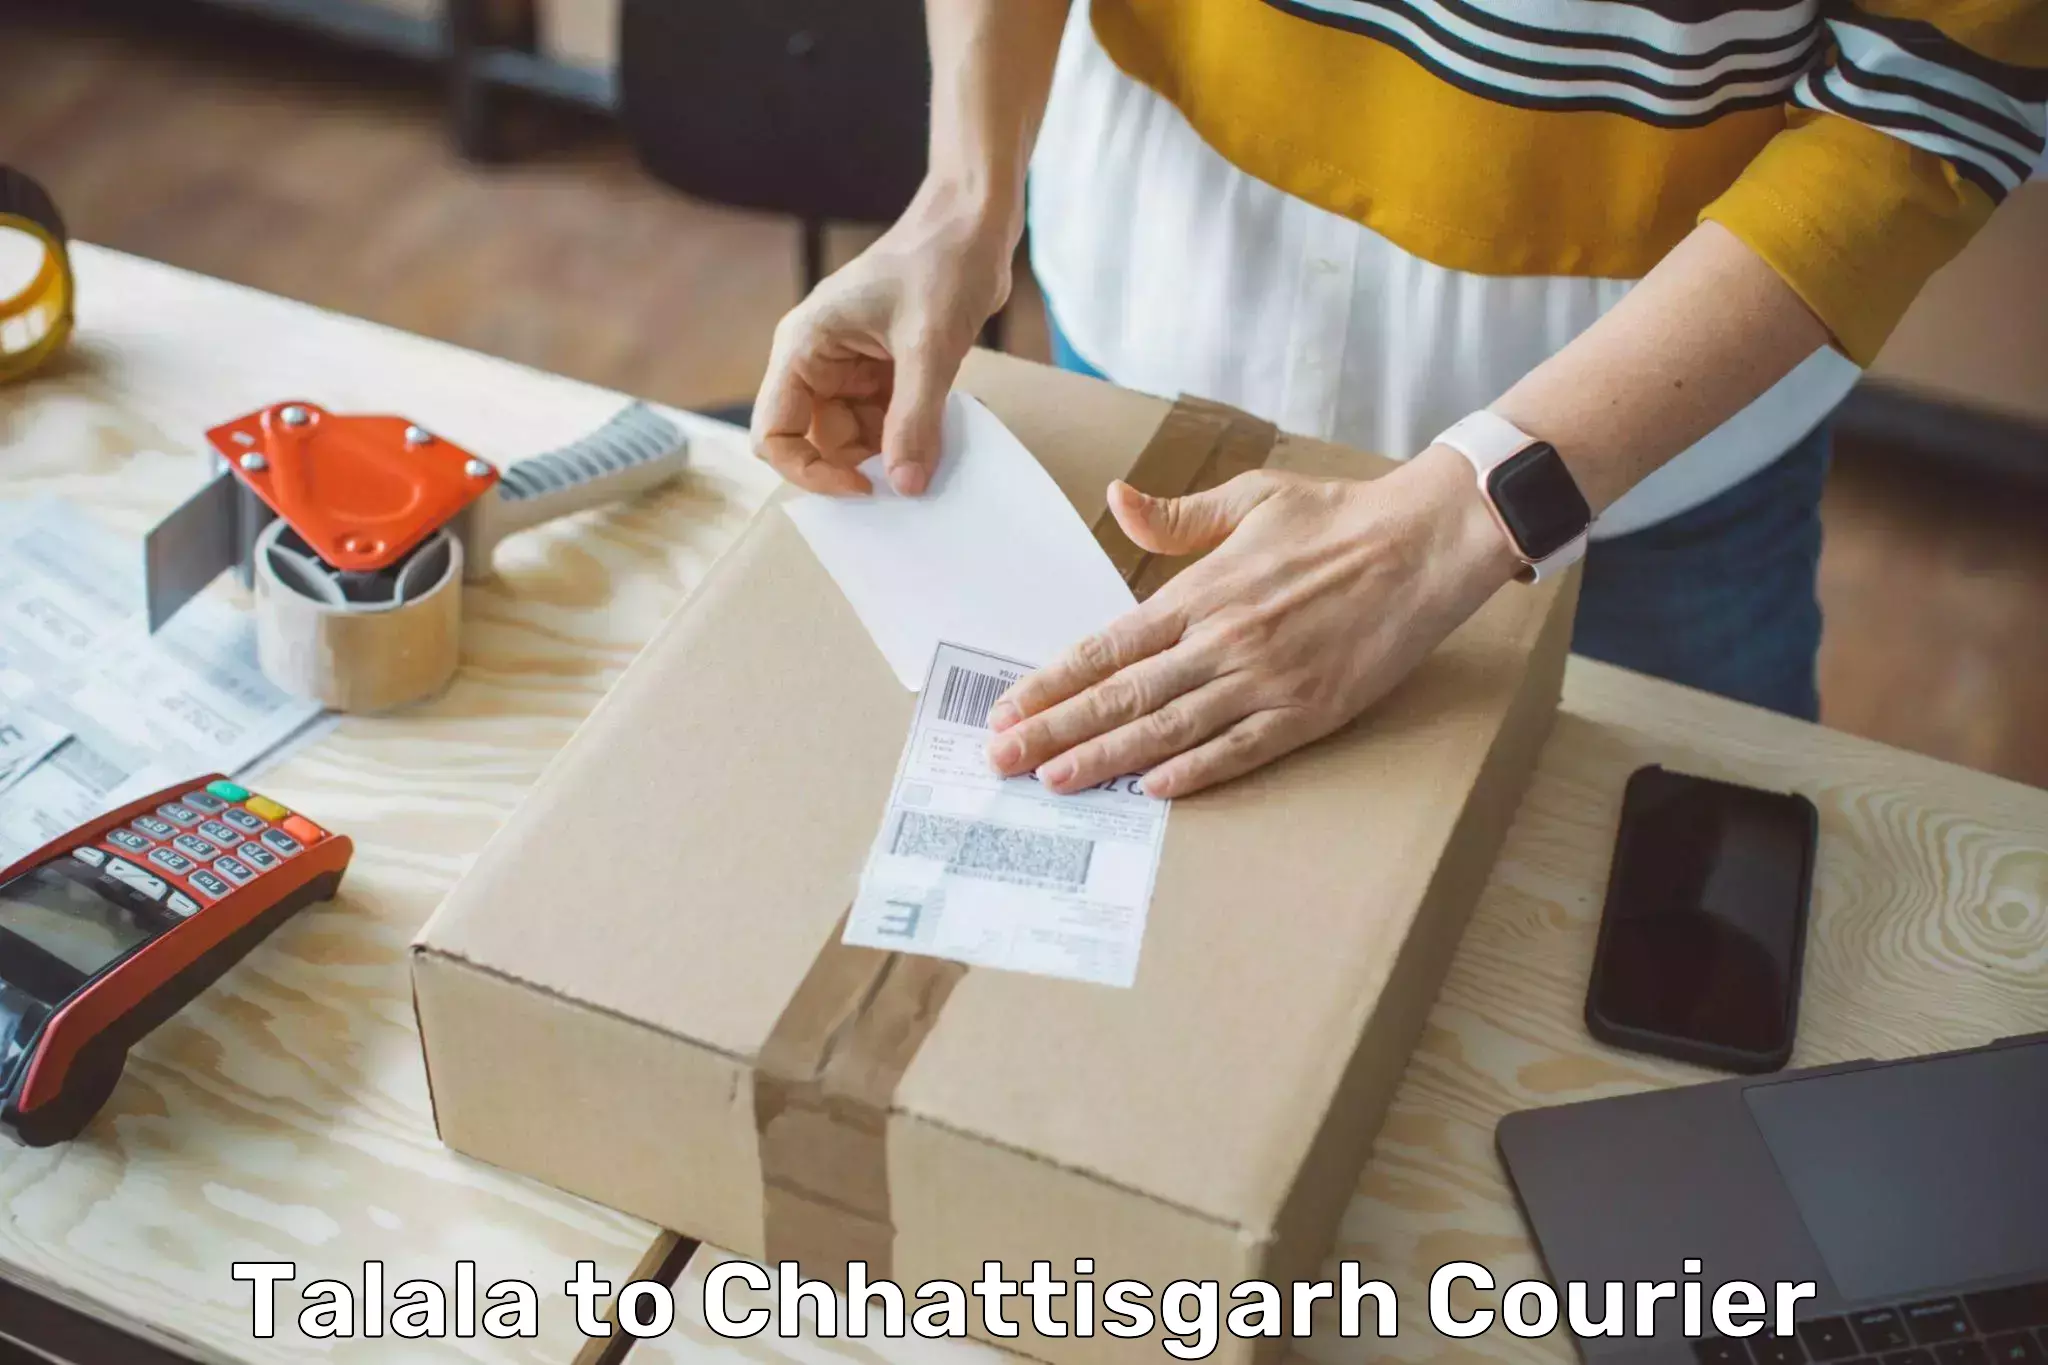 Flexible delivery scheduling Talala to Chhattisgarh